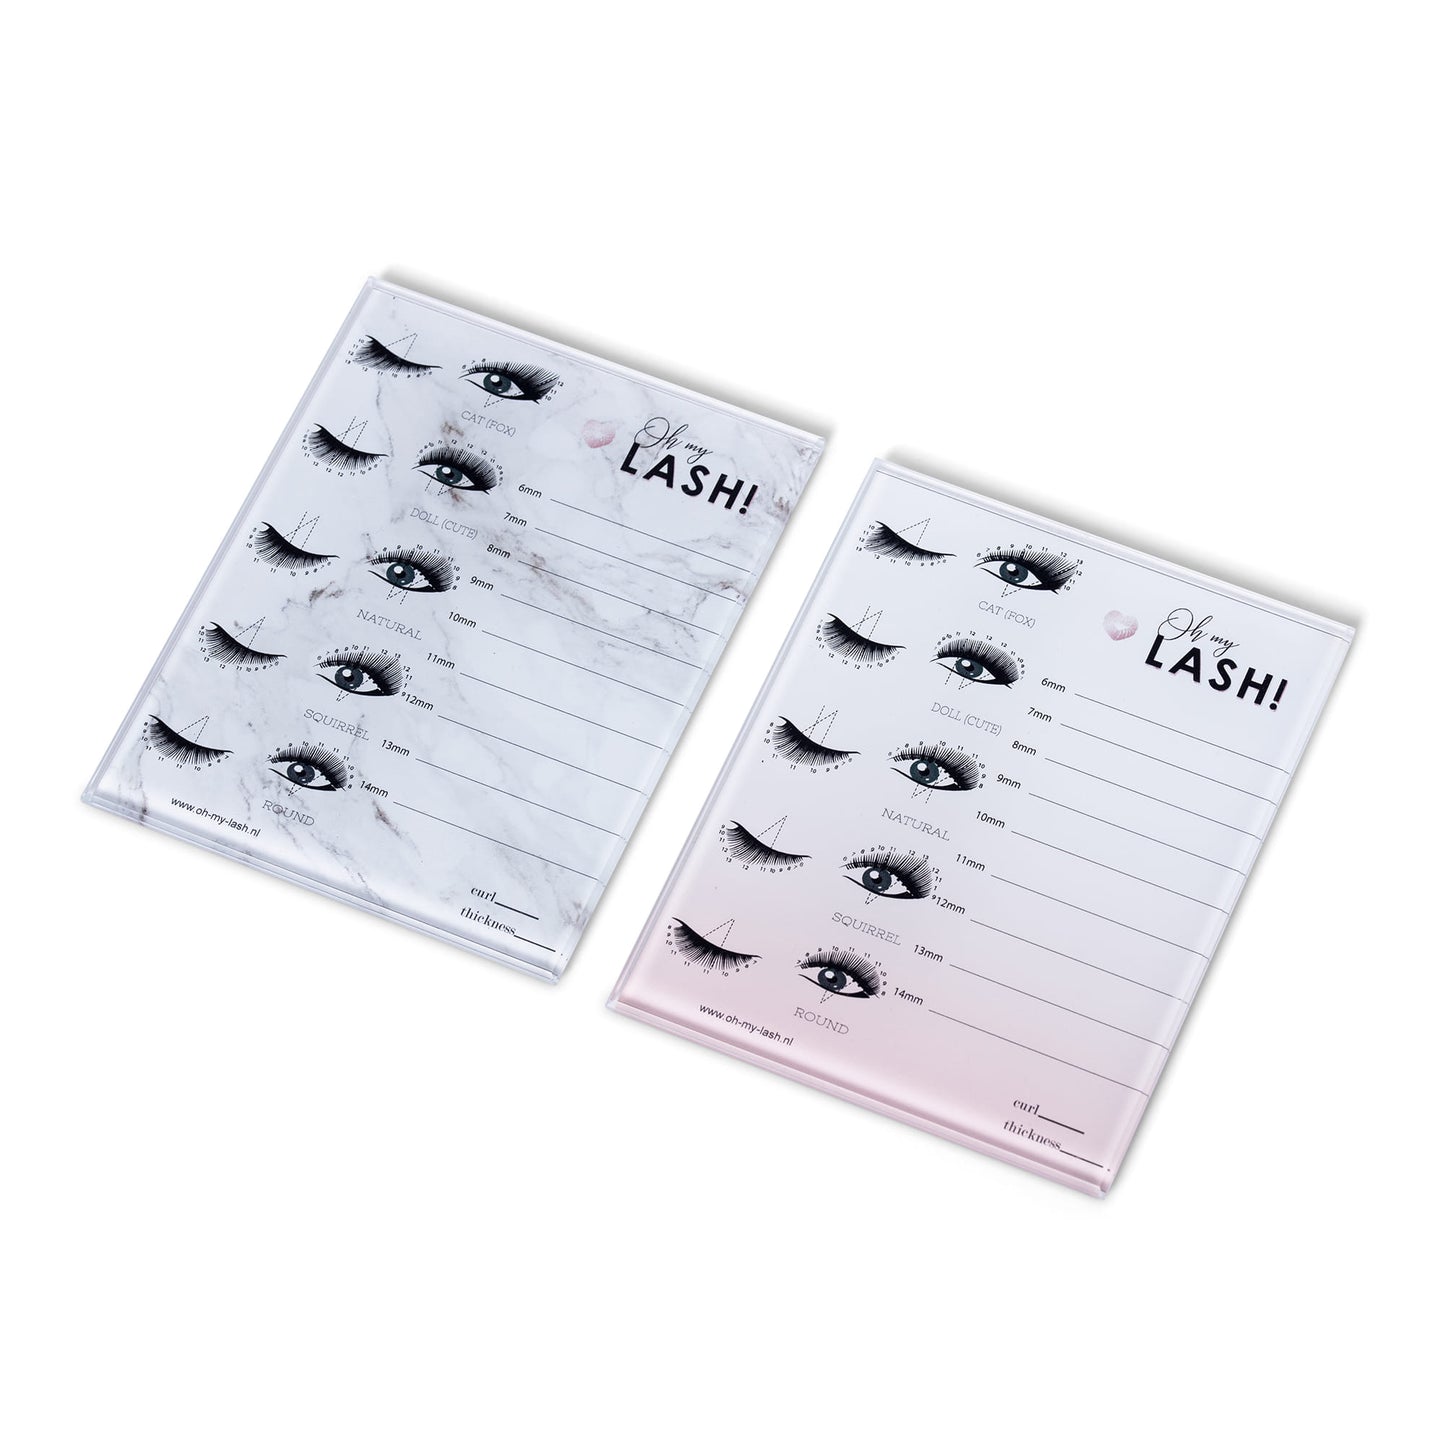 Lash Holder with Styling Guide - Pink/white